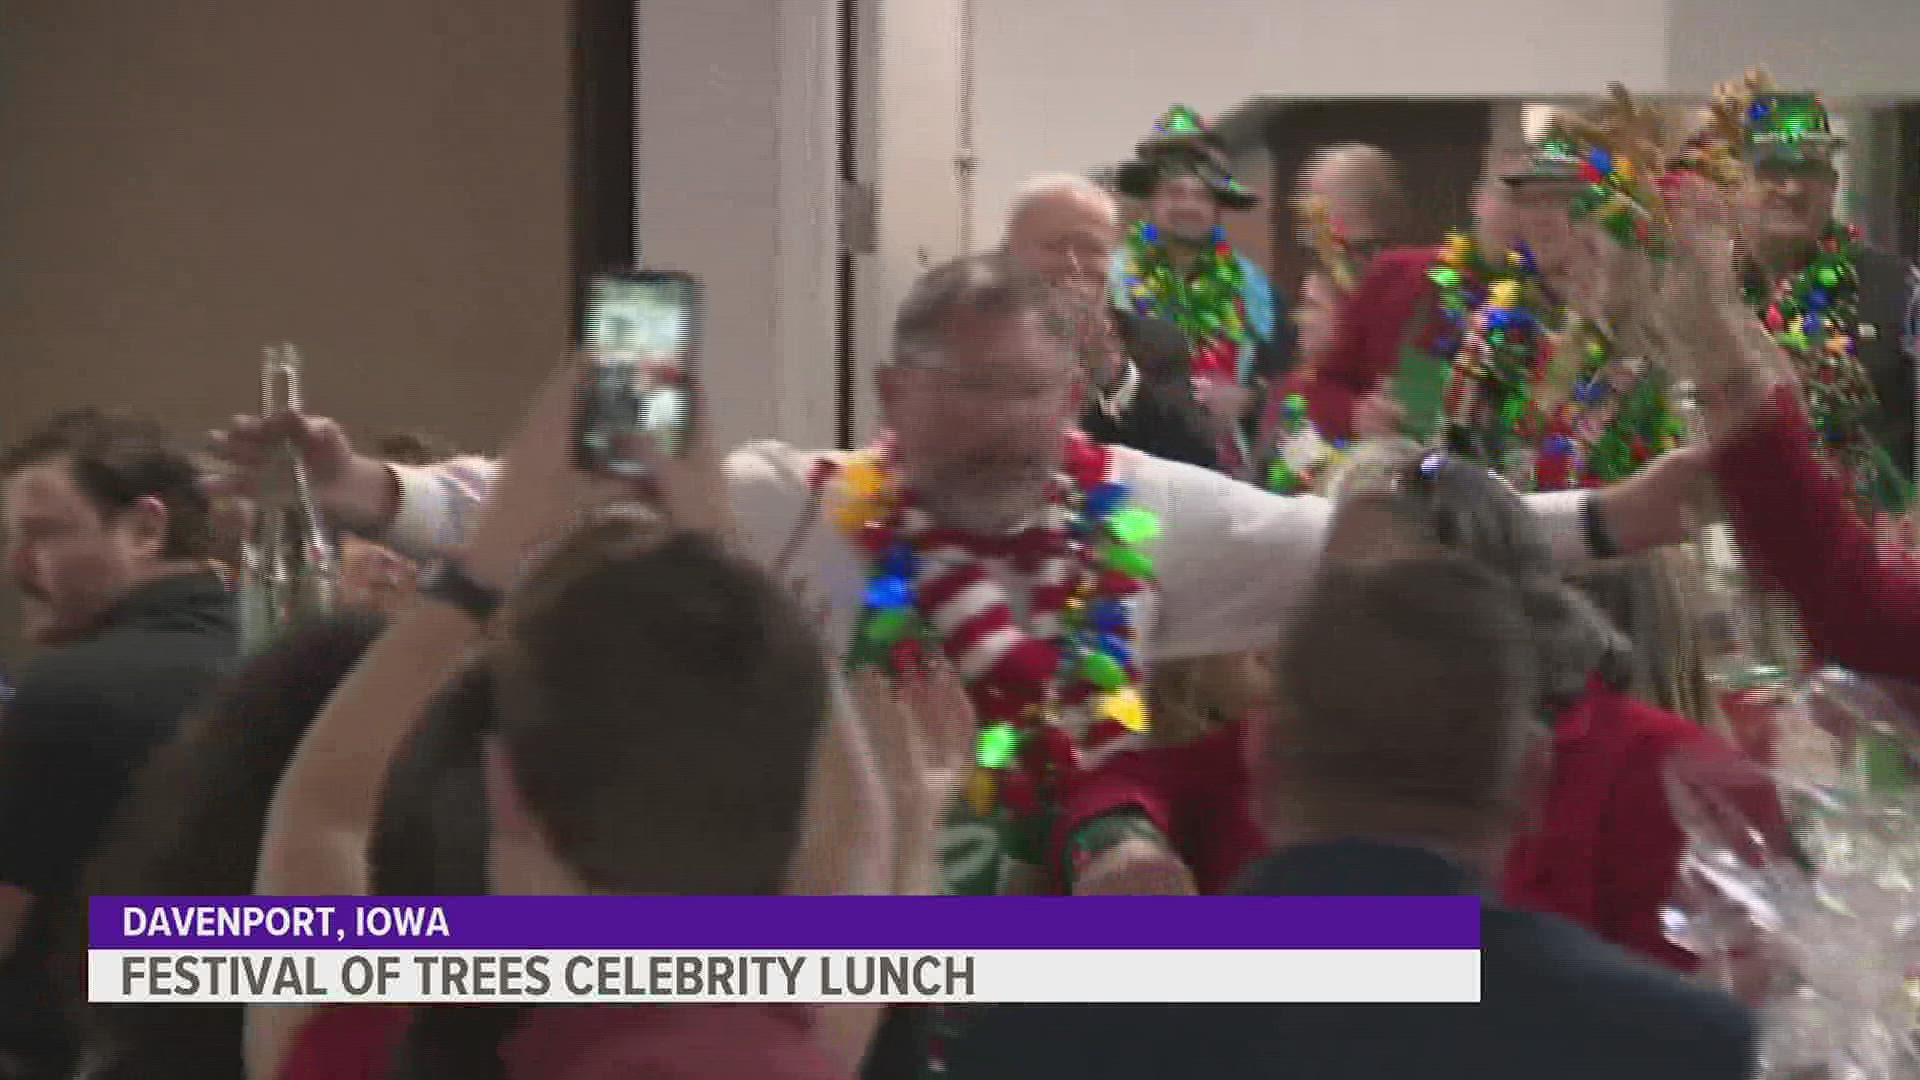 Local celebs and guests, like Bettendorf mayor Mike Gallagher, brought fun and energy as they waited tables at the lunch benefitting Quad City Arts.